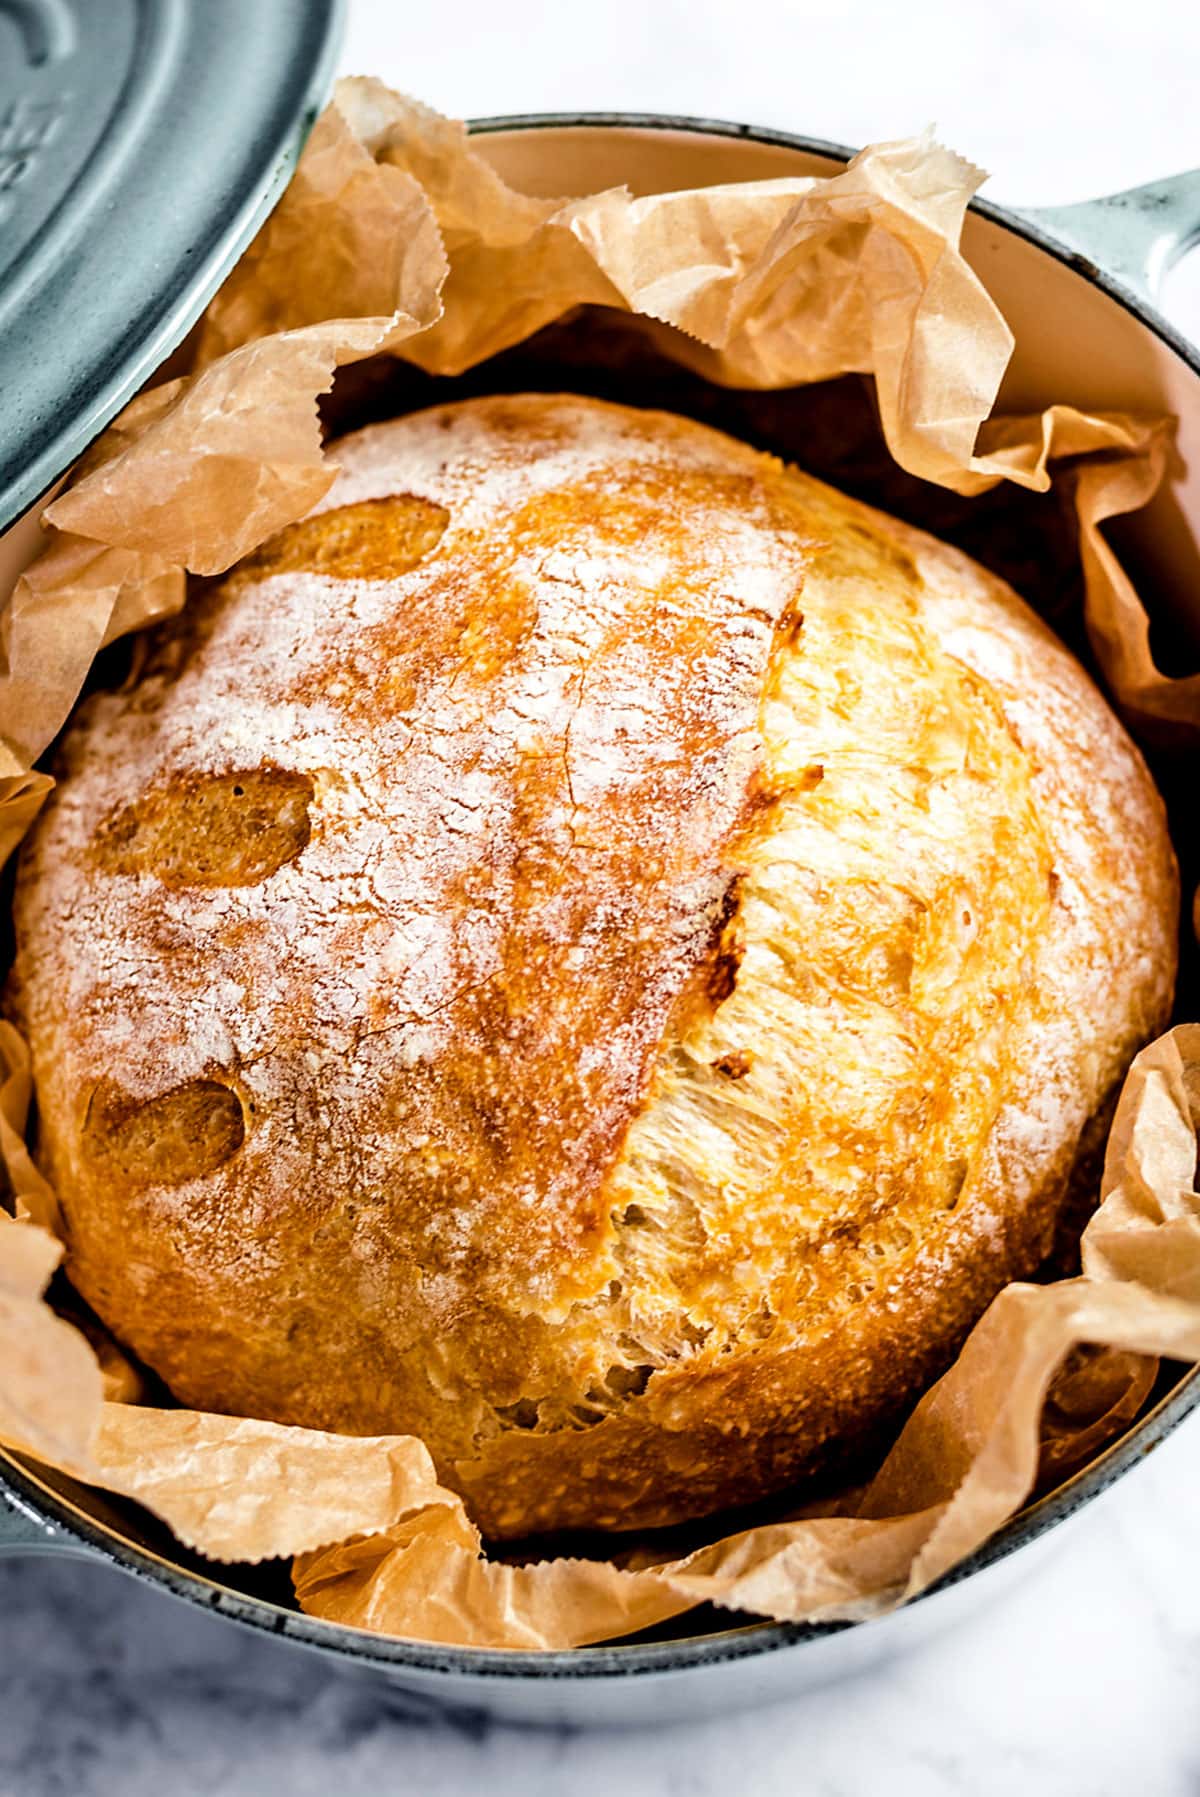 Le Creuset's New Bread Oven Achieves a Perfectly Crusty Loaf